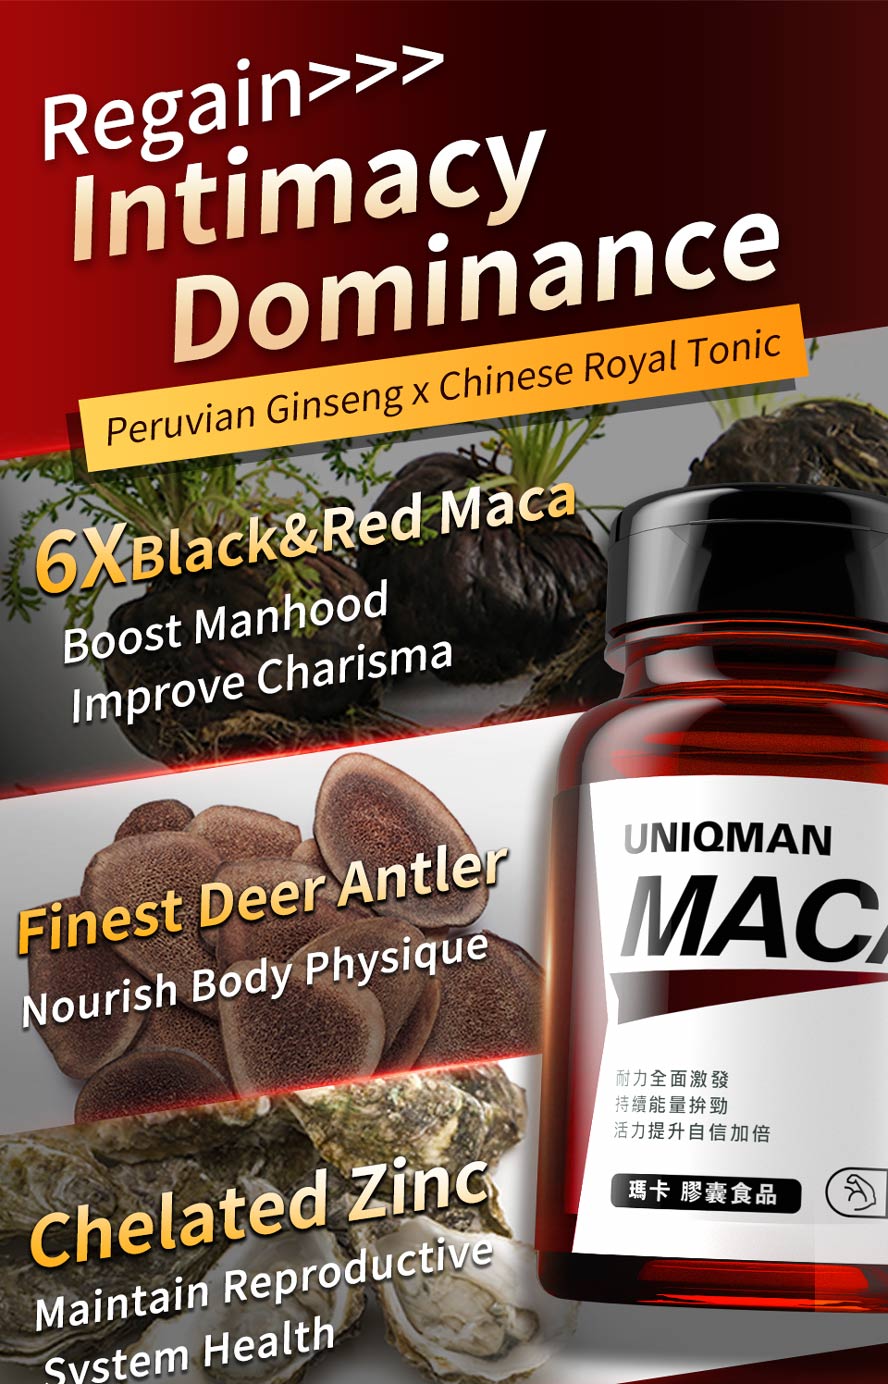 UNIQMAN Maca uses 6X concentrated black & red maca, deer antler, and chelated zinc to nourish body, boost man power, and maintain healthy reproductive system.